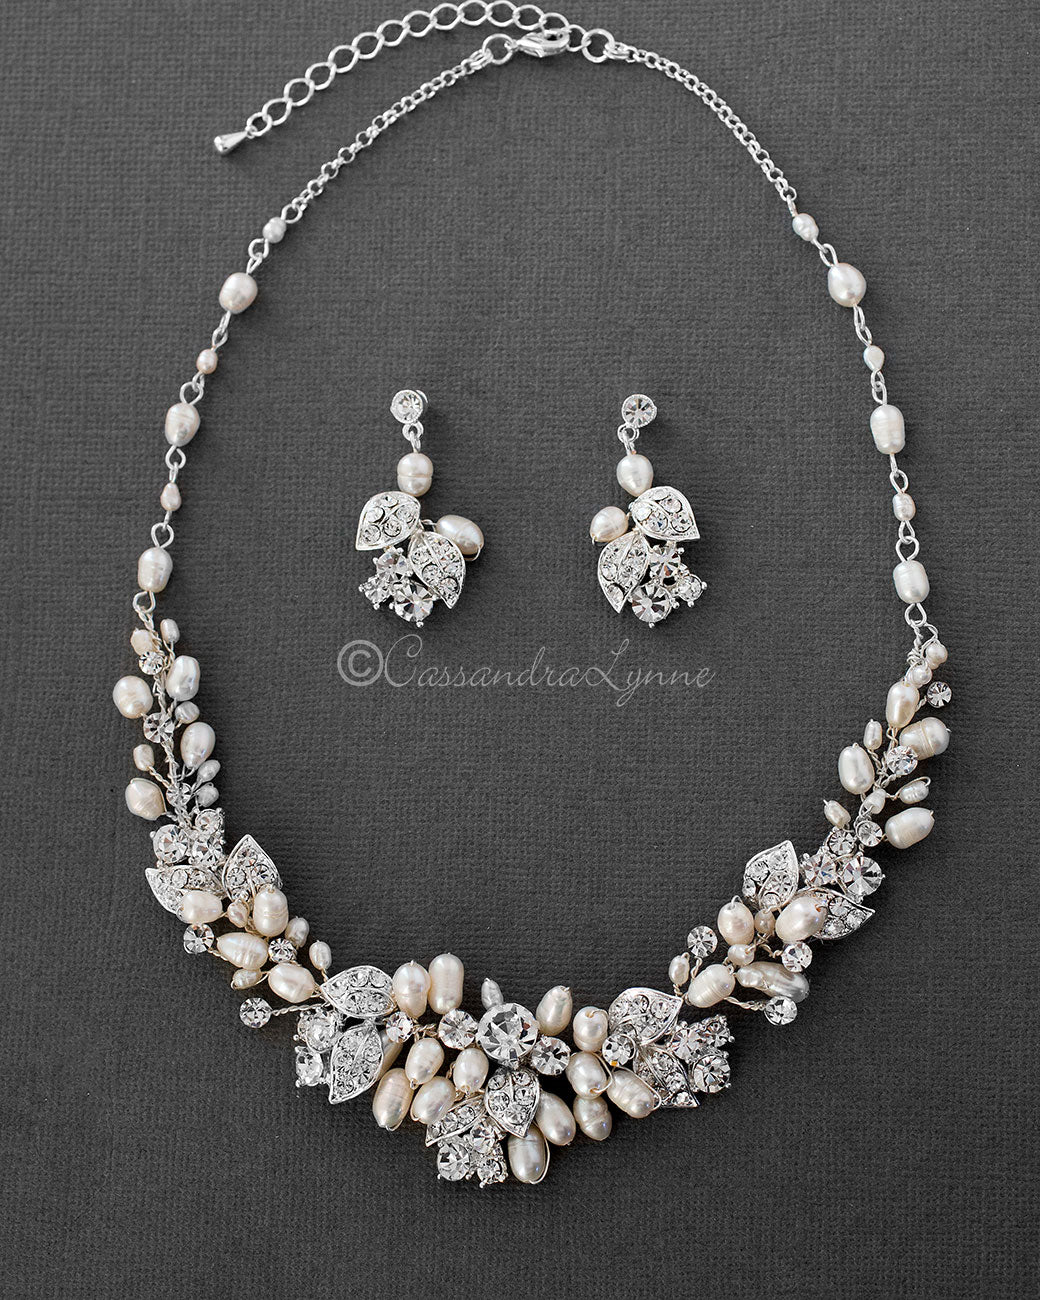 Crystal and Ivory Pearl Wedding Jewelry Set